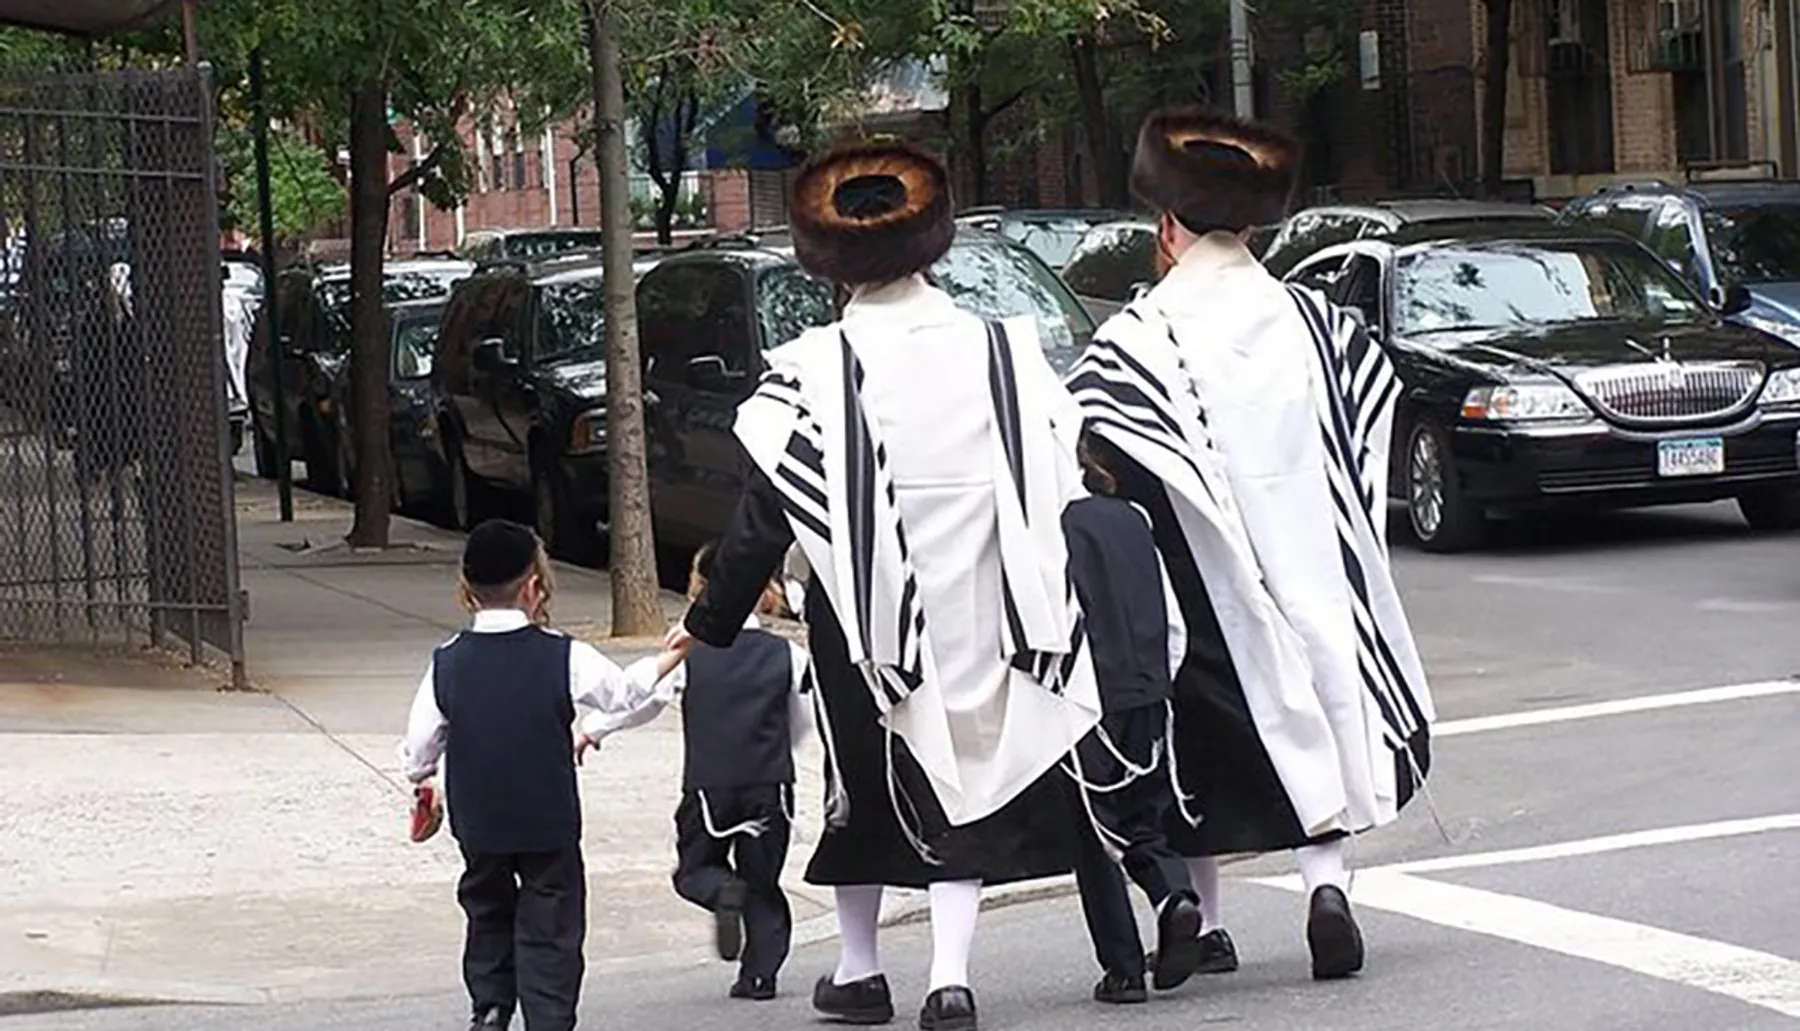 Two adults and two children, dressed in traditional Hasidic Jewish attire with prayer shawls and fur hats, are walking down a city sidewalk.